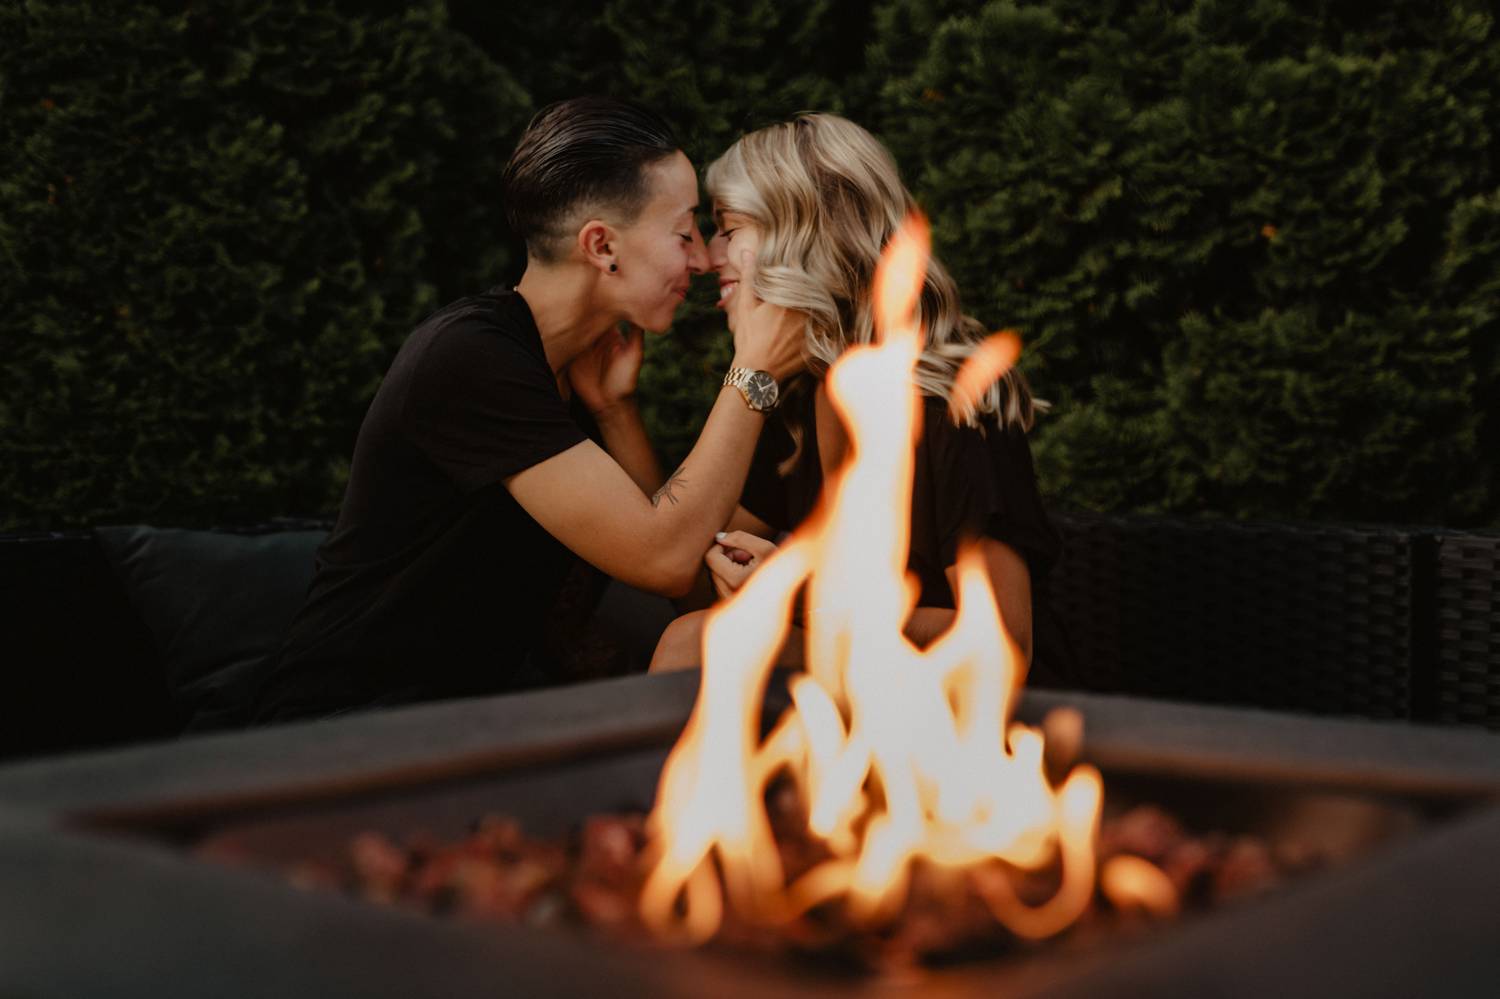 An LGBTQ couples move in close to kiss as they're photographed across the flames of a twilight fire pit